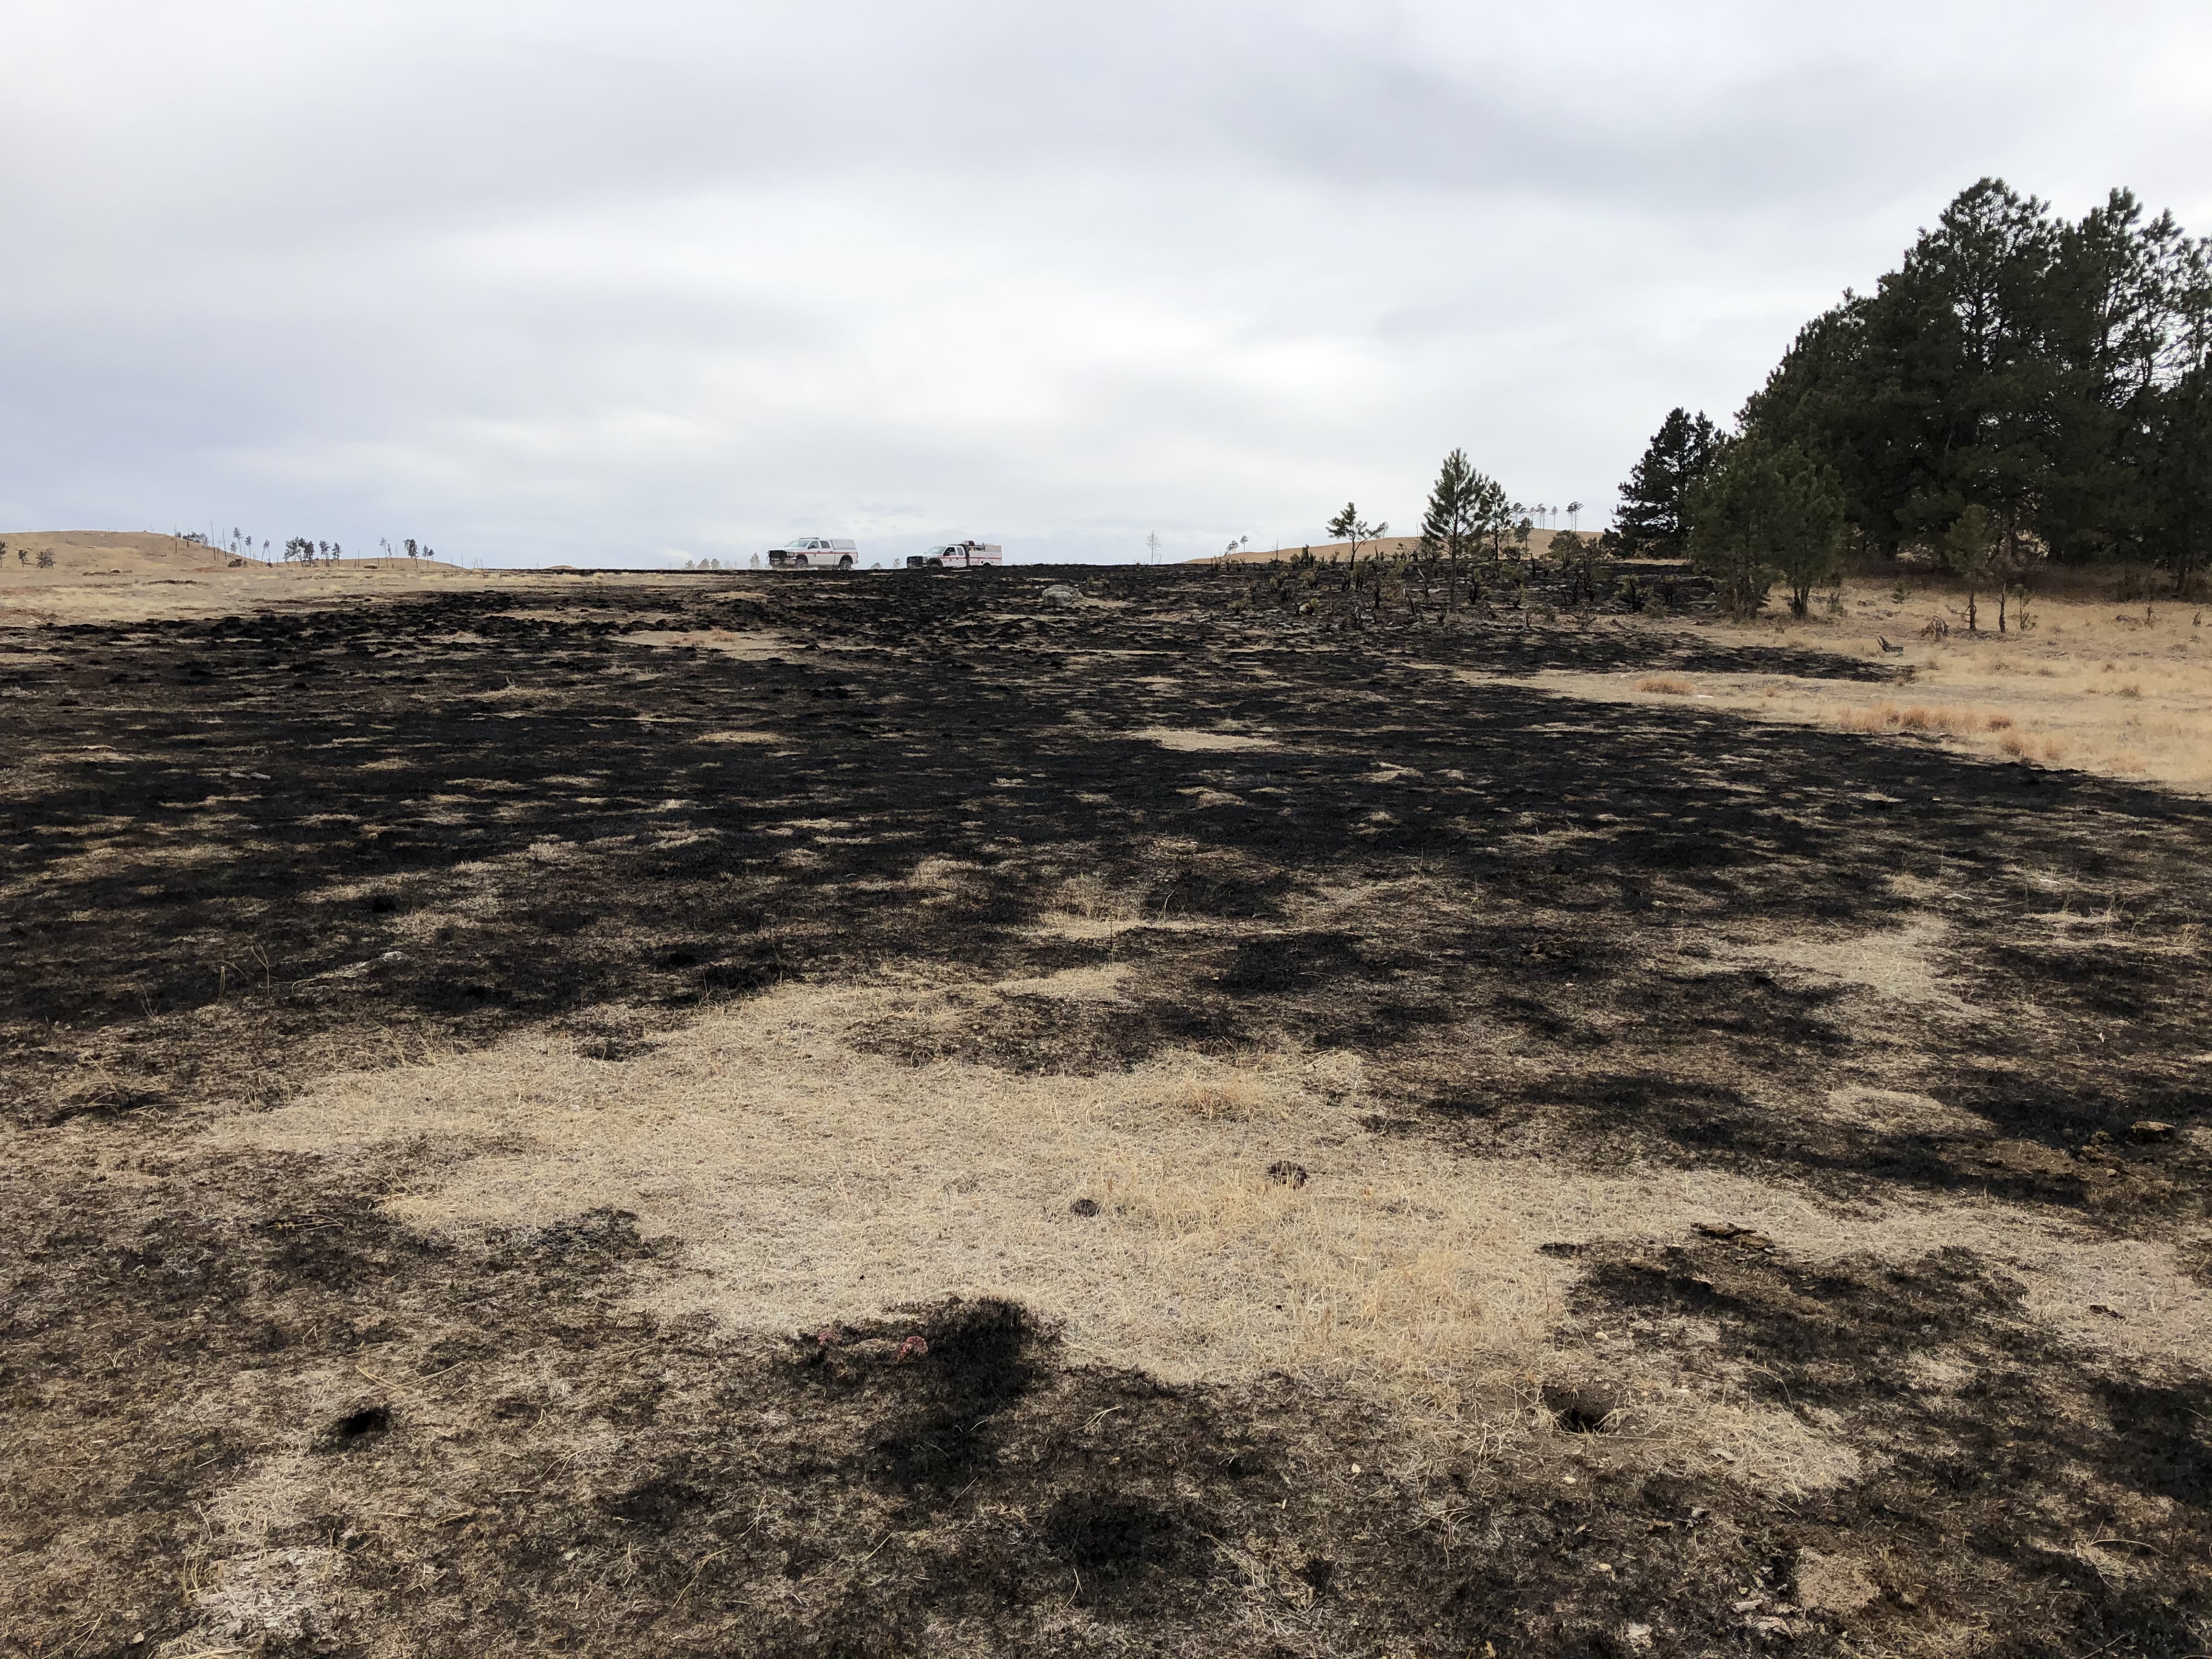 Looking uphill at a prairie, mostly burnt but with some patches of unburnt grass, with a few pine trees to the right. Fire engines in the distant background.